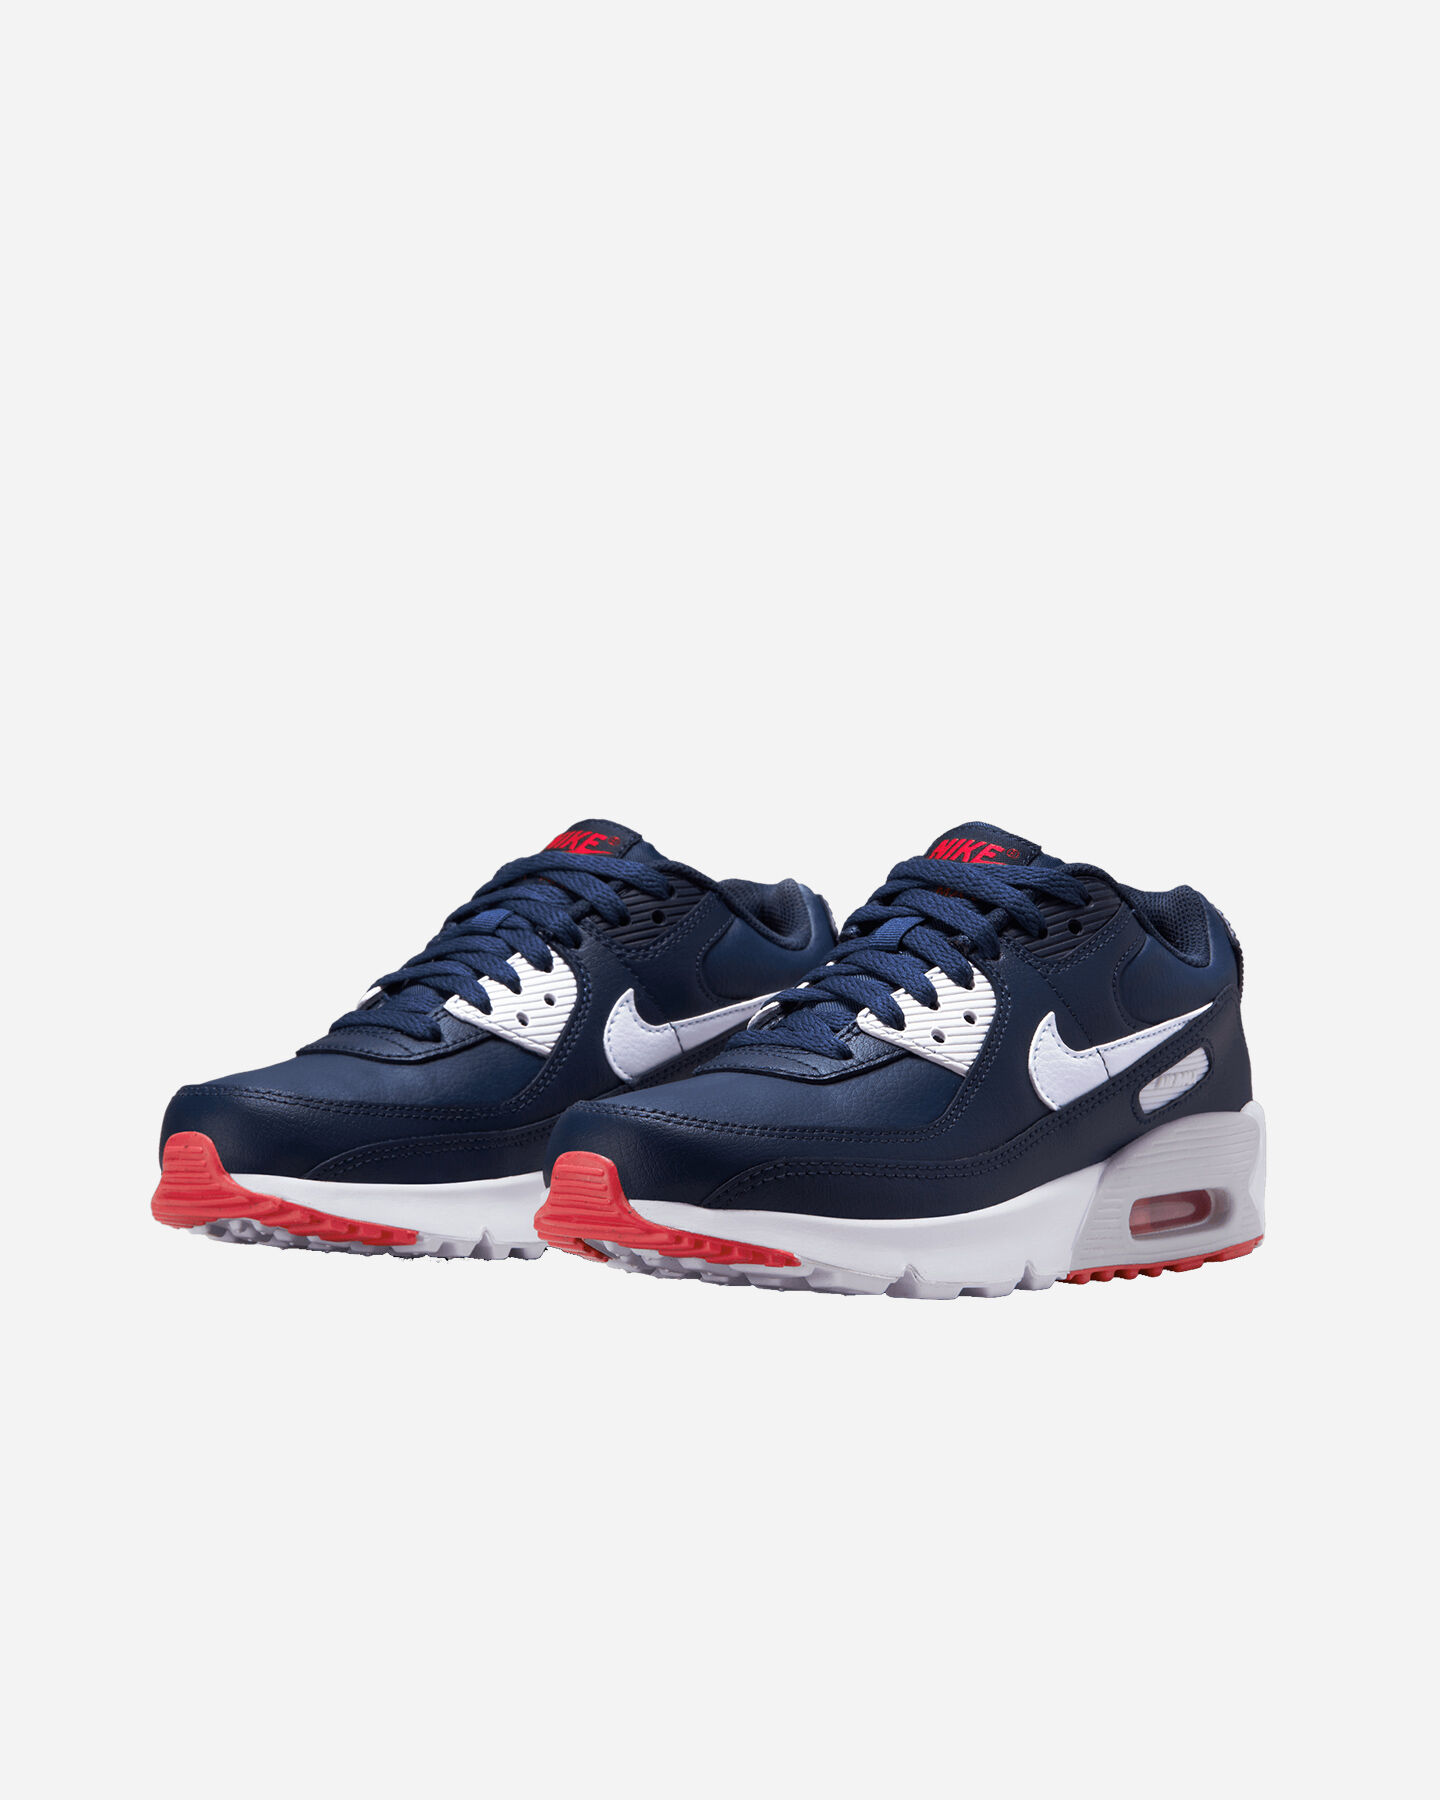  Scarpe sneakers NIKE AIR MAX 90 LTR GS JR S5599874|400|4Y scatto 1